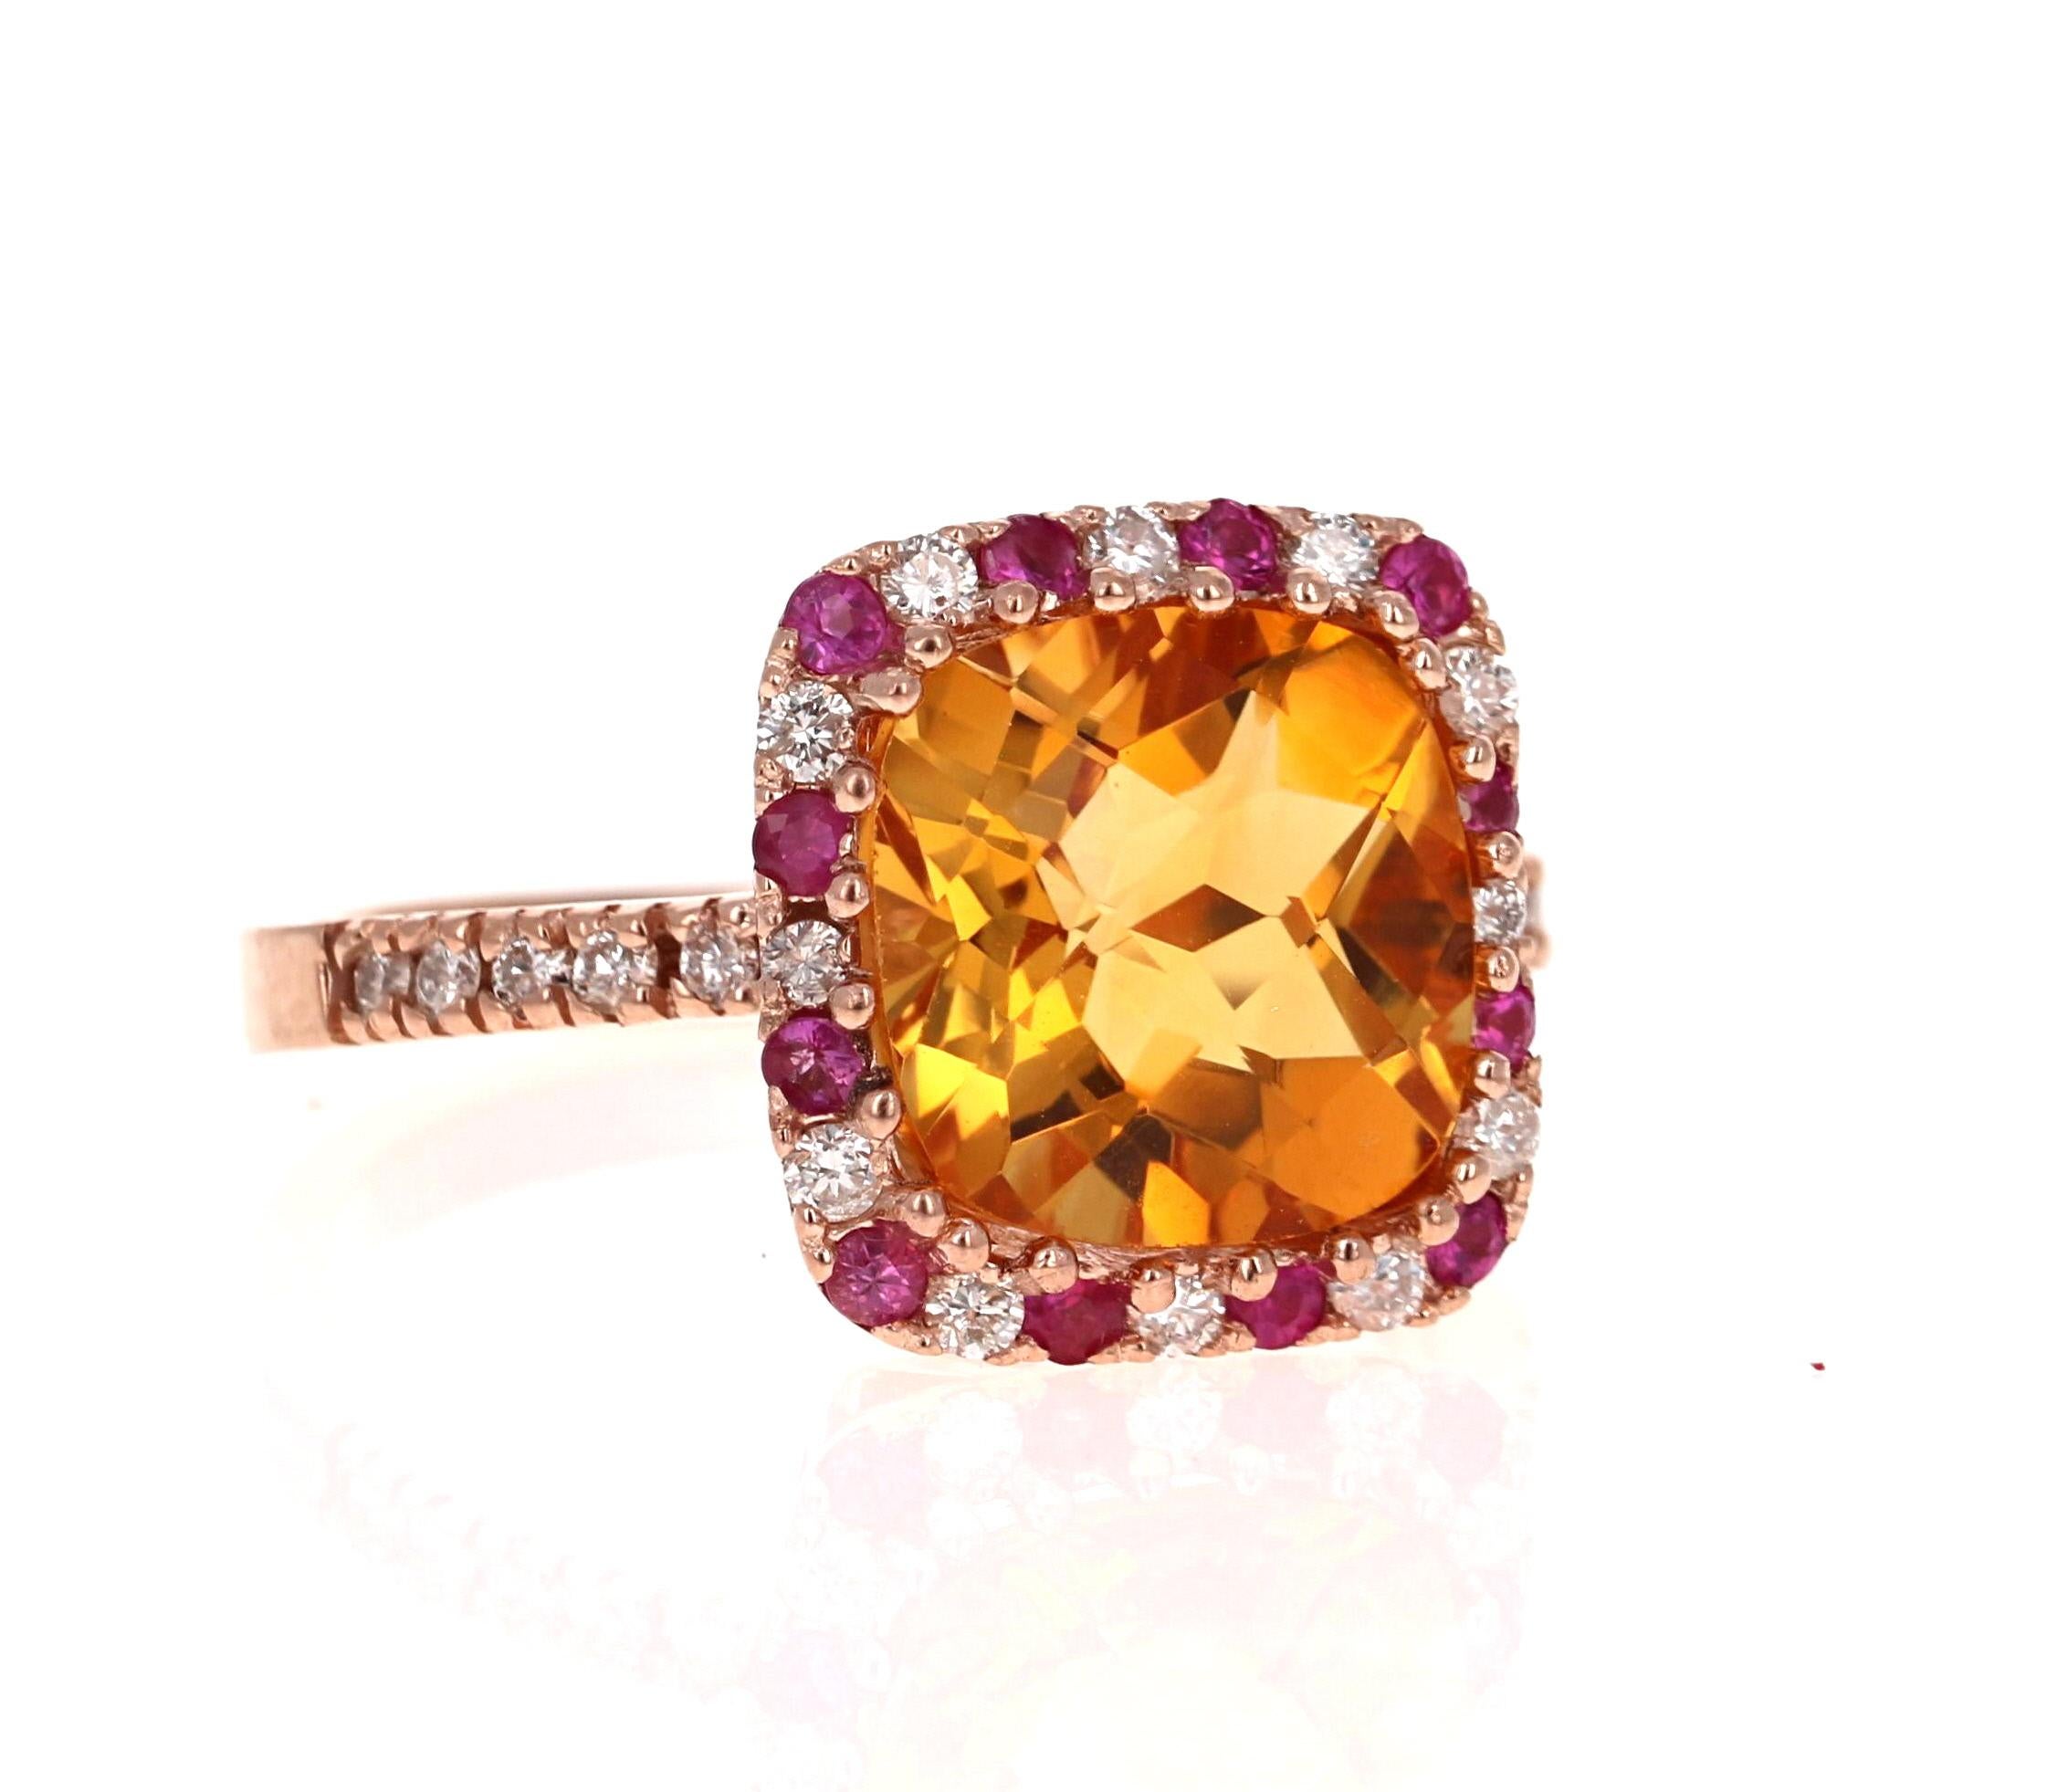 A Stunning and Unique piece to say the least! 

This magnificent ring has a bold Cushion Cut Citrine that is blazing yellow! It weighs 4.09 carats and is surrounded by a beautiful row of alternating Diamonds and Pink Sapphires. There are 12 Round